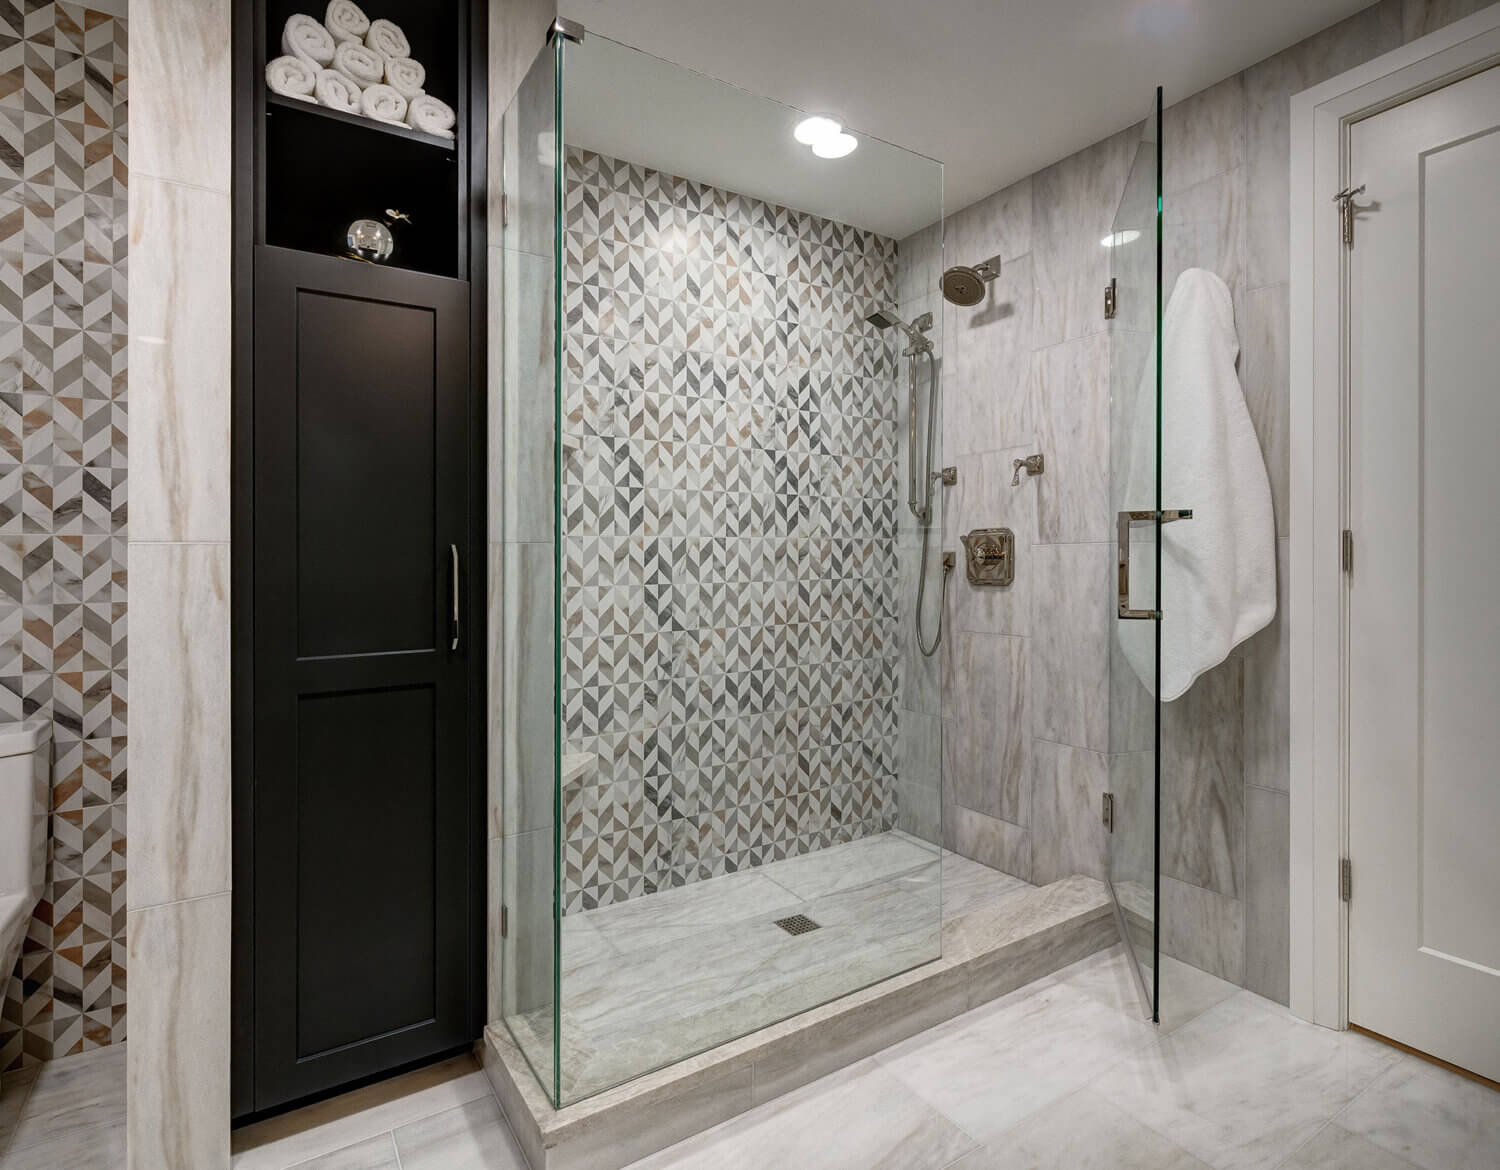 A built-in linen cabinet in black paint is set into the wall behind the walk-in shower creating a beautiful space for linen storage.